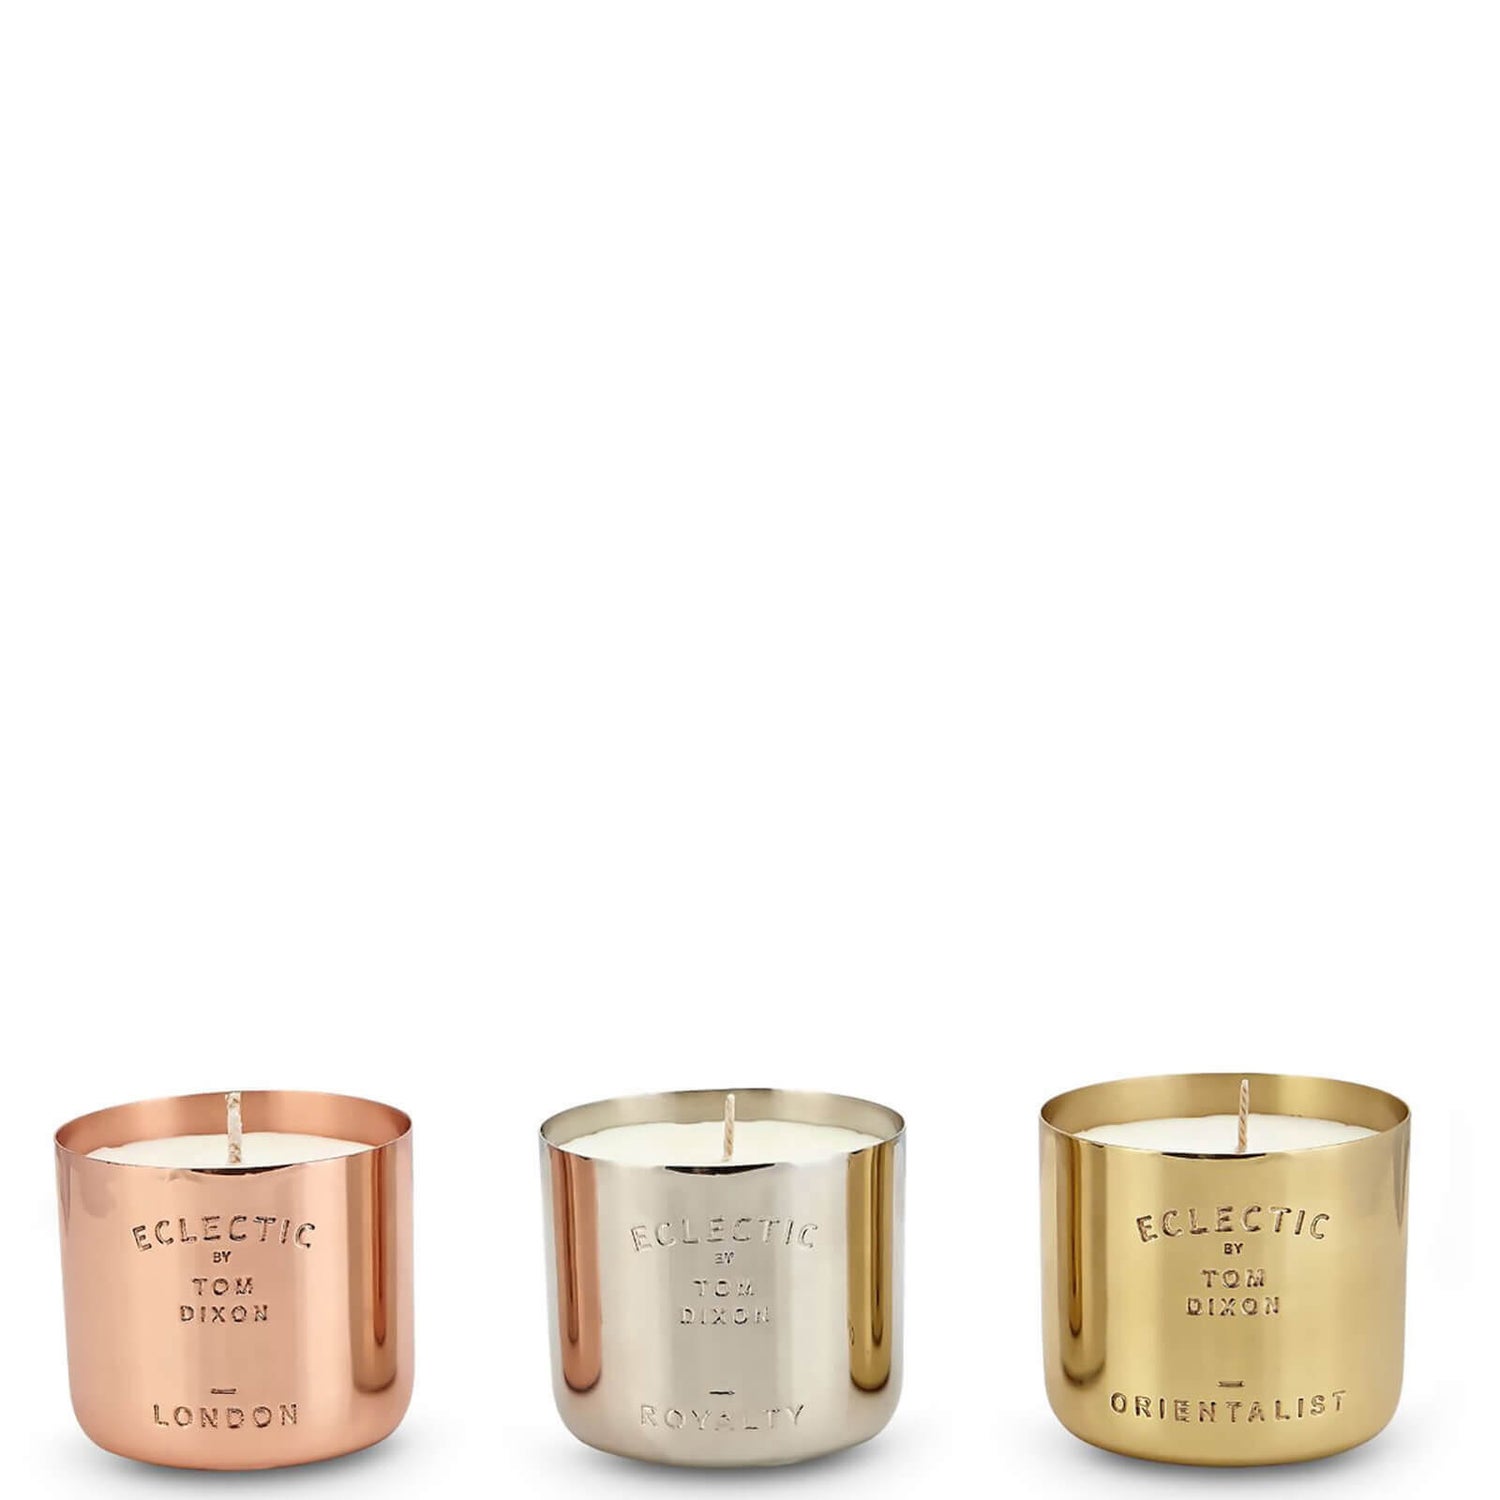 Tom Dixon Ecelctic Candle Gift Set - London, Root, Royalty